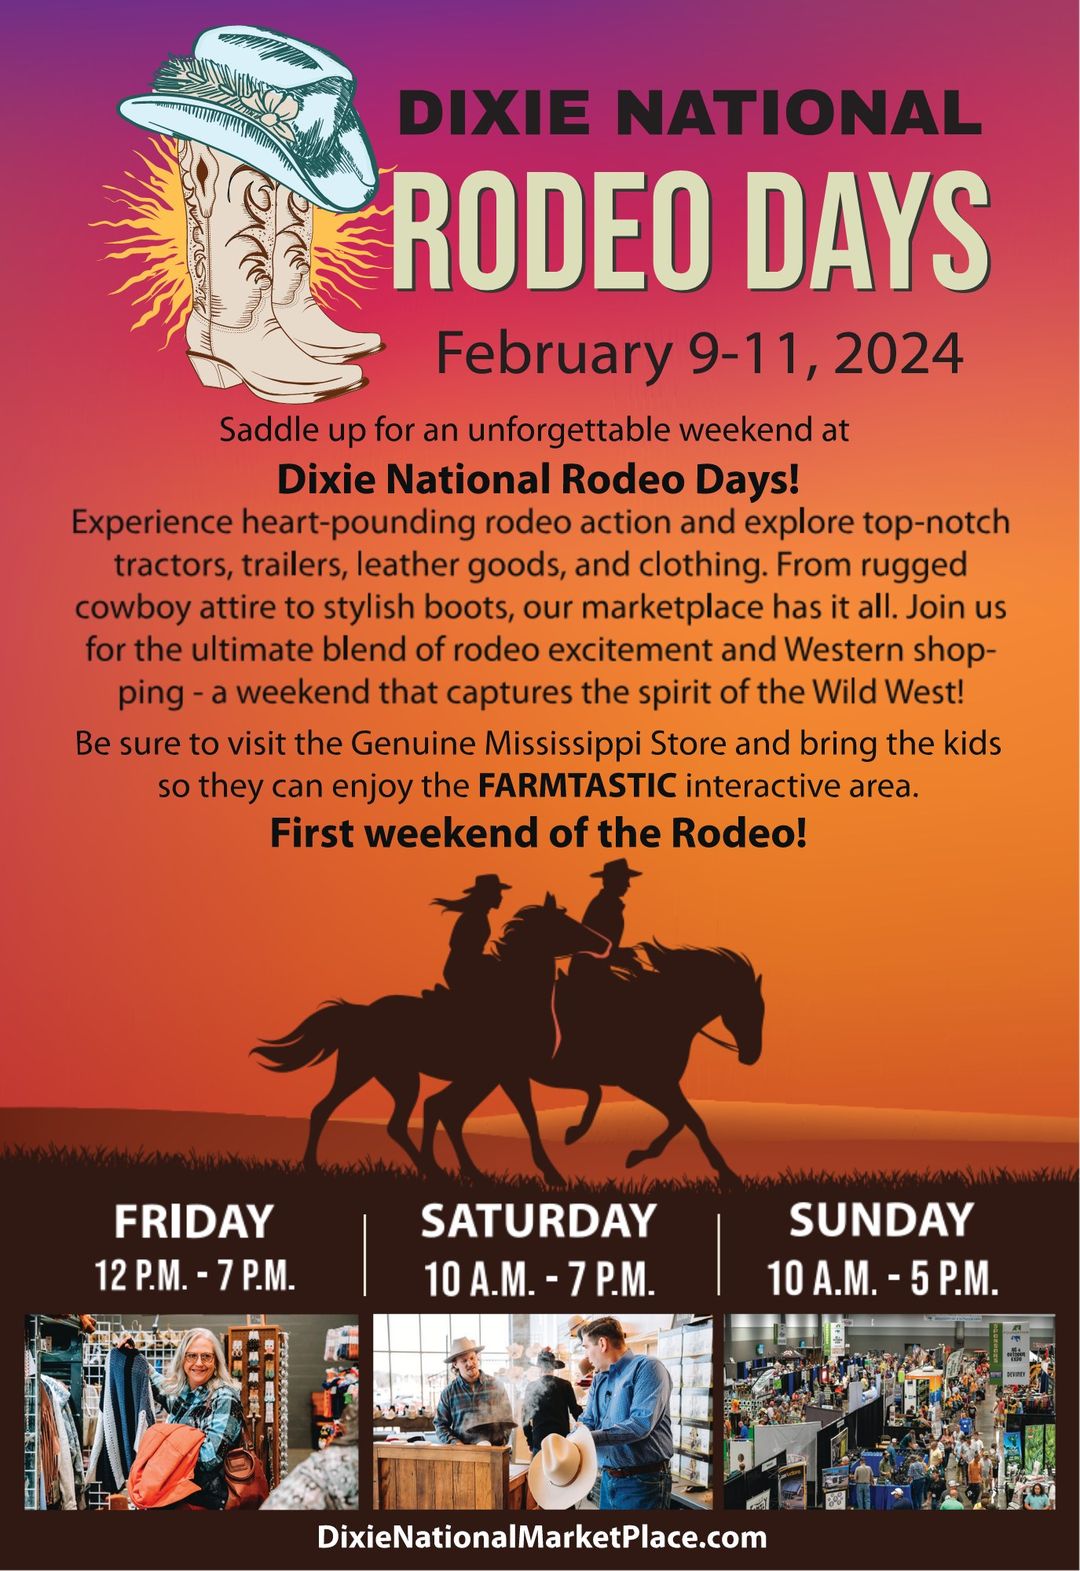 Dixie National Rodeo Days